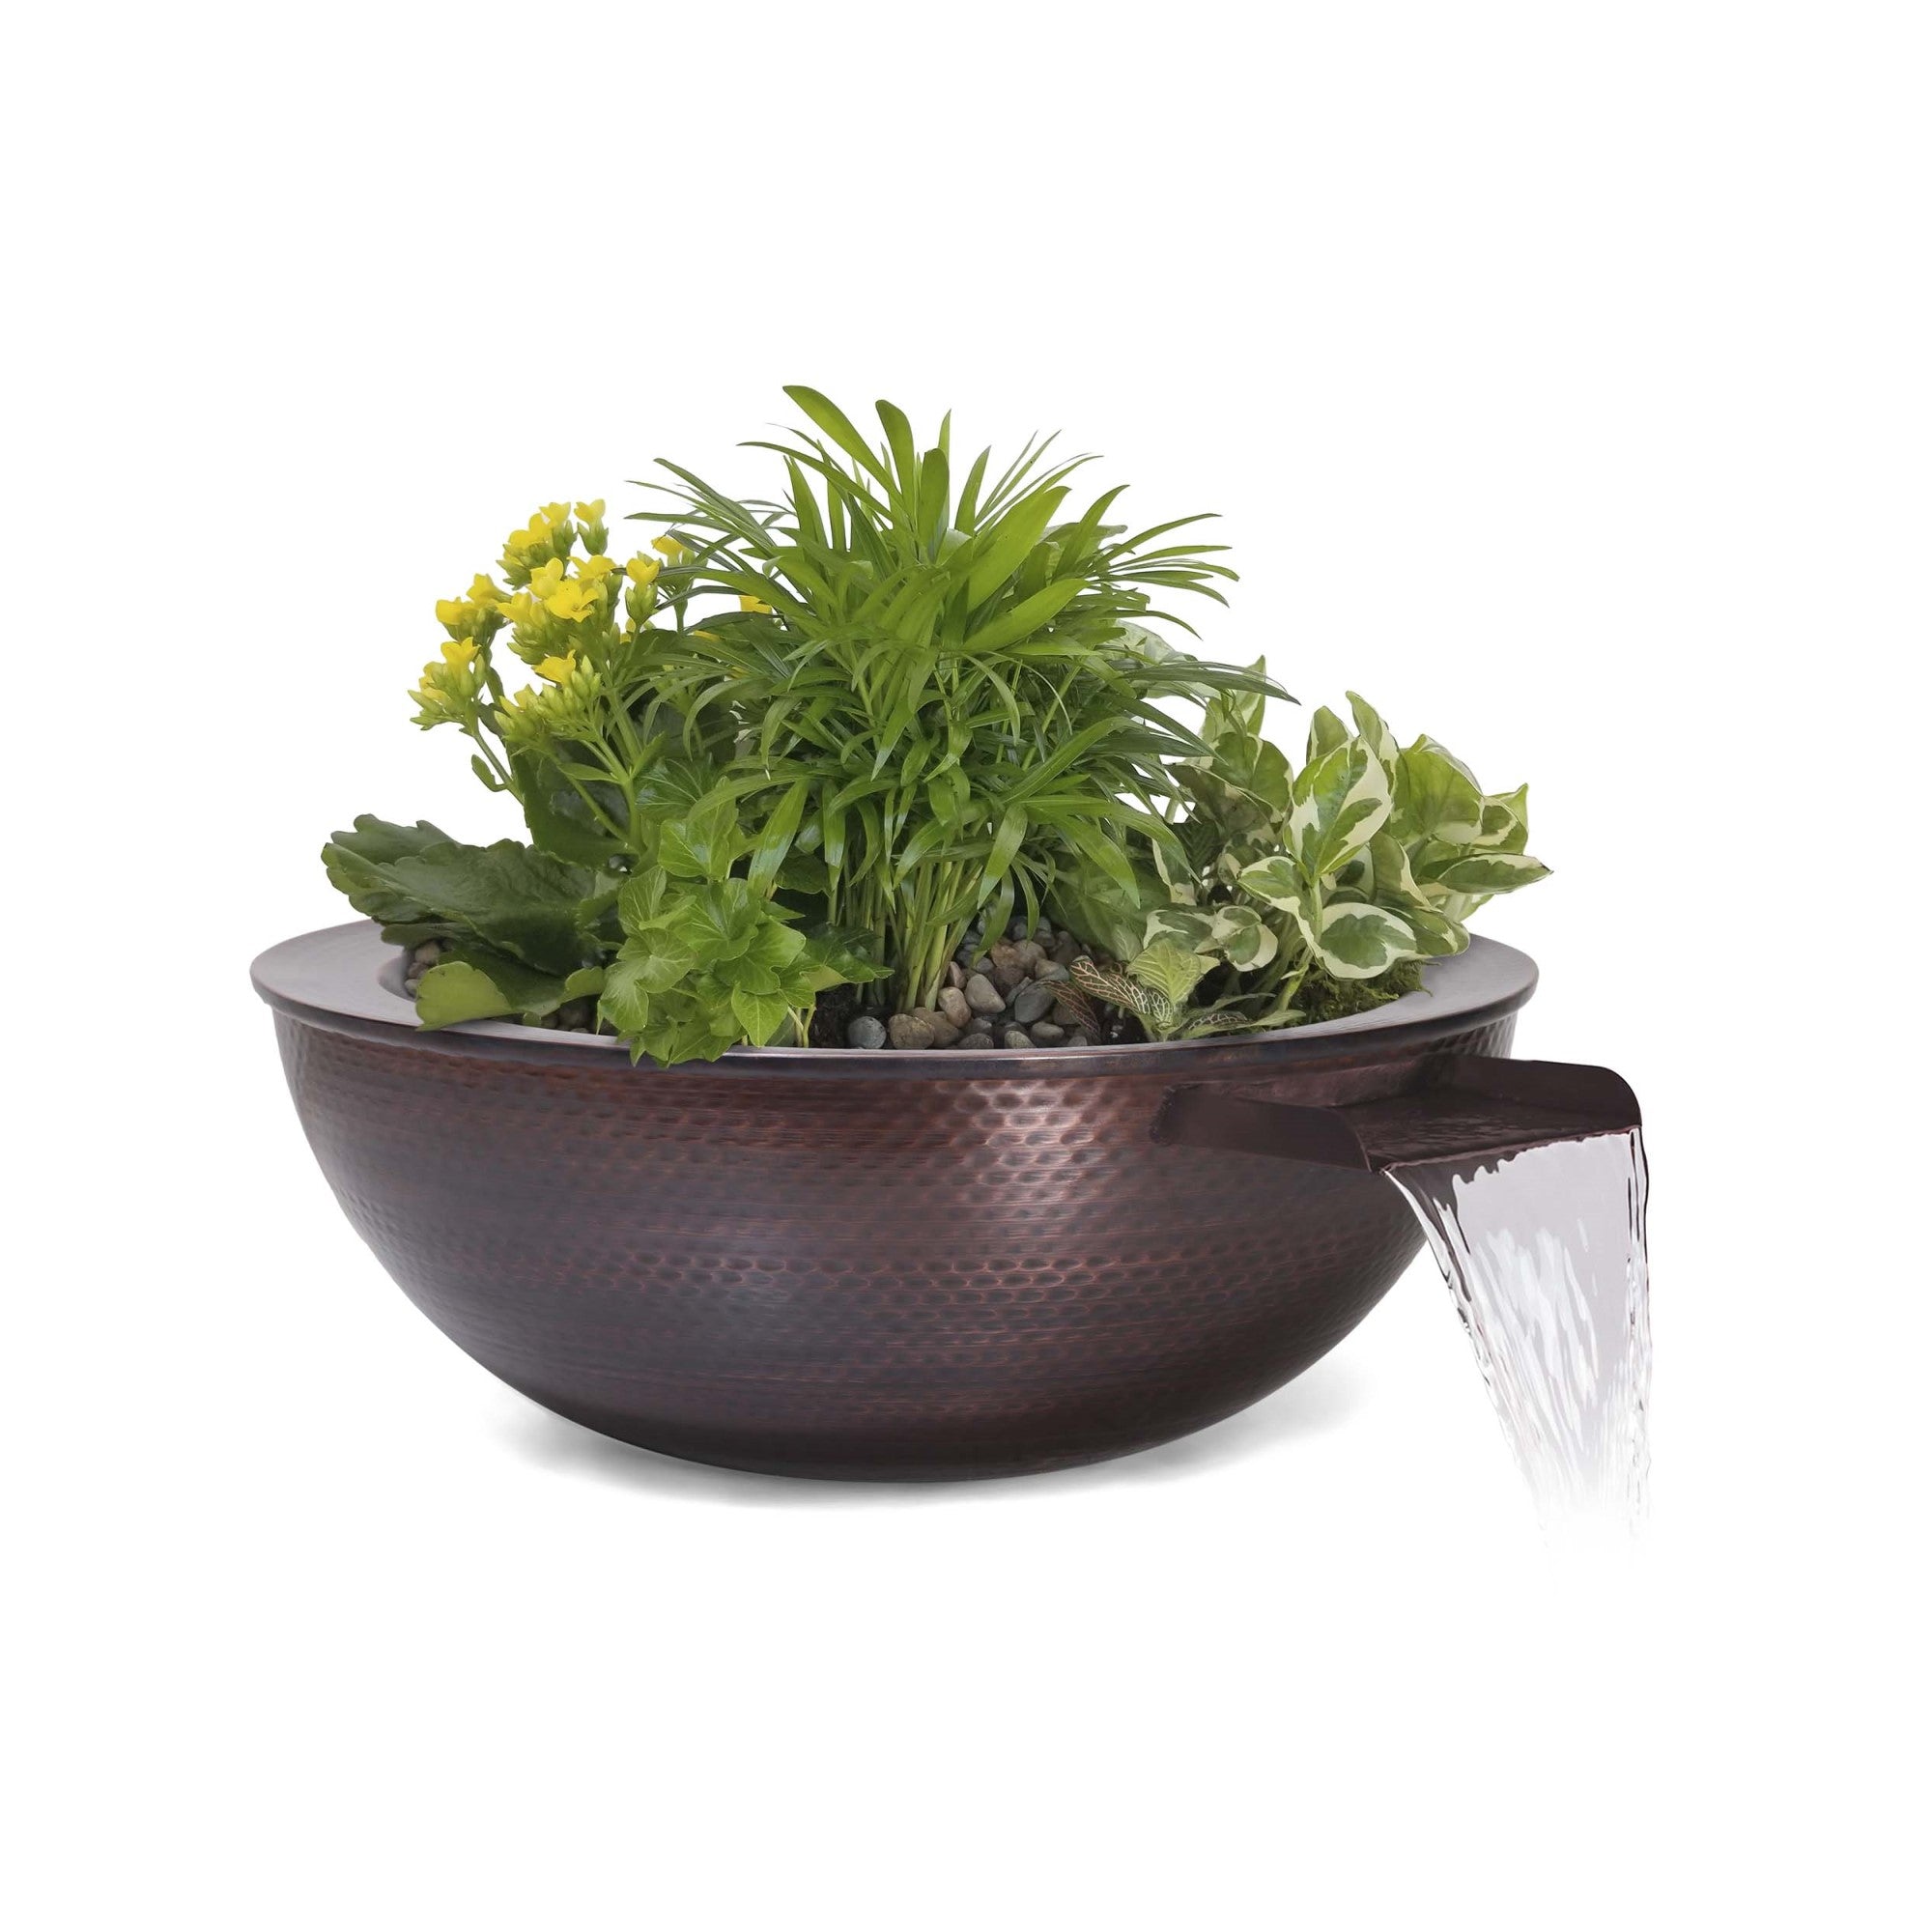 Sedona Planter & Water Bowl - Hammered Copper